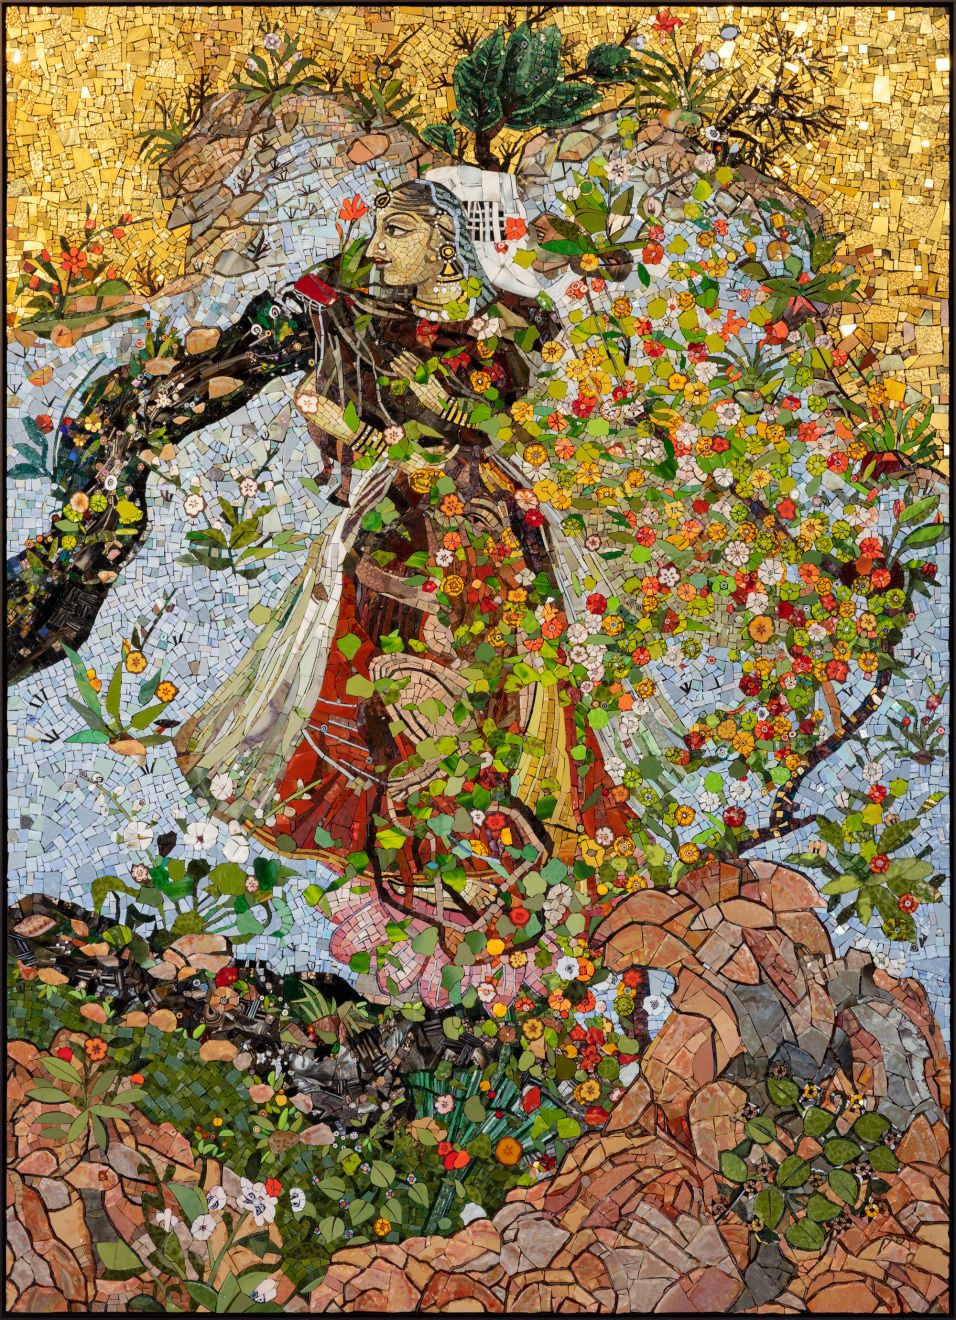 Shahzia Sikander Touchstone, 2021 Glass mosaic with patinated brass frame 83 1/8 x 59 7/8 inches (211.1 x 152.1 cm)  framed: 84 x 60 3/4 inches (213.36 x 154.31 cm) the work is accompanied by a signed certificate of authenticity (ShS-S.21.109.1)